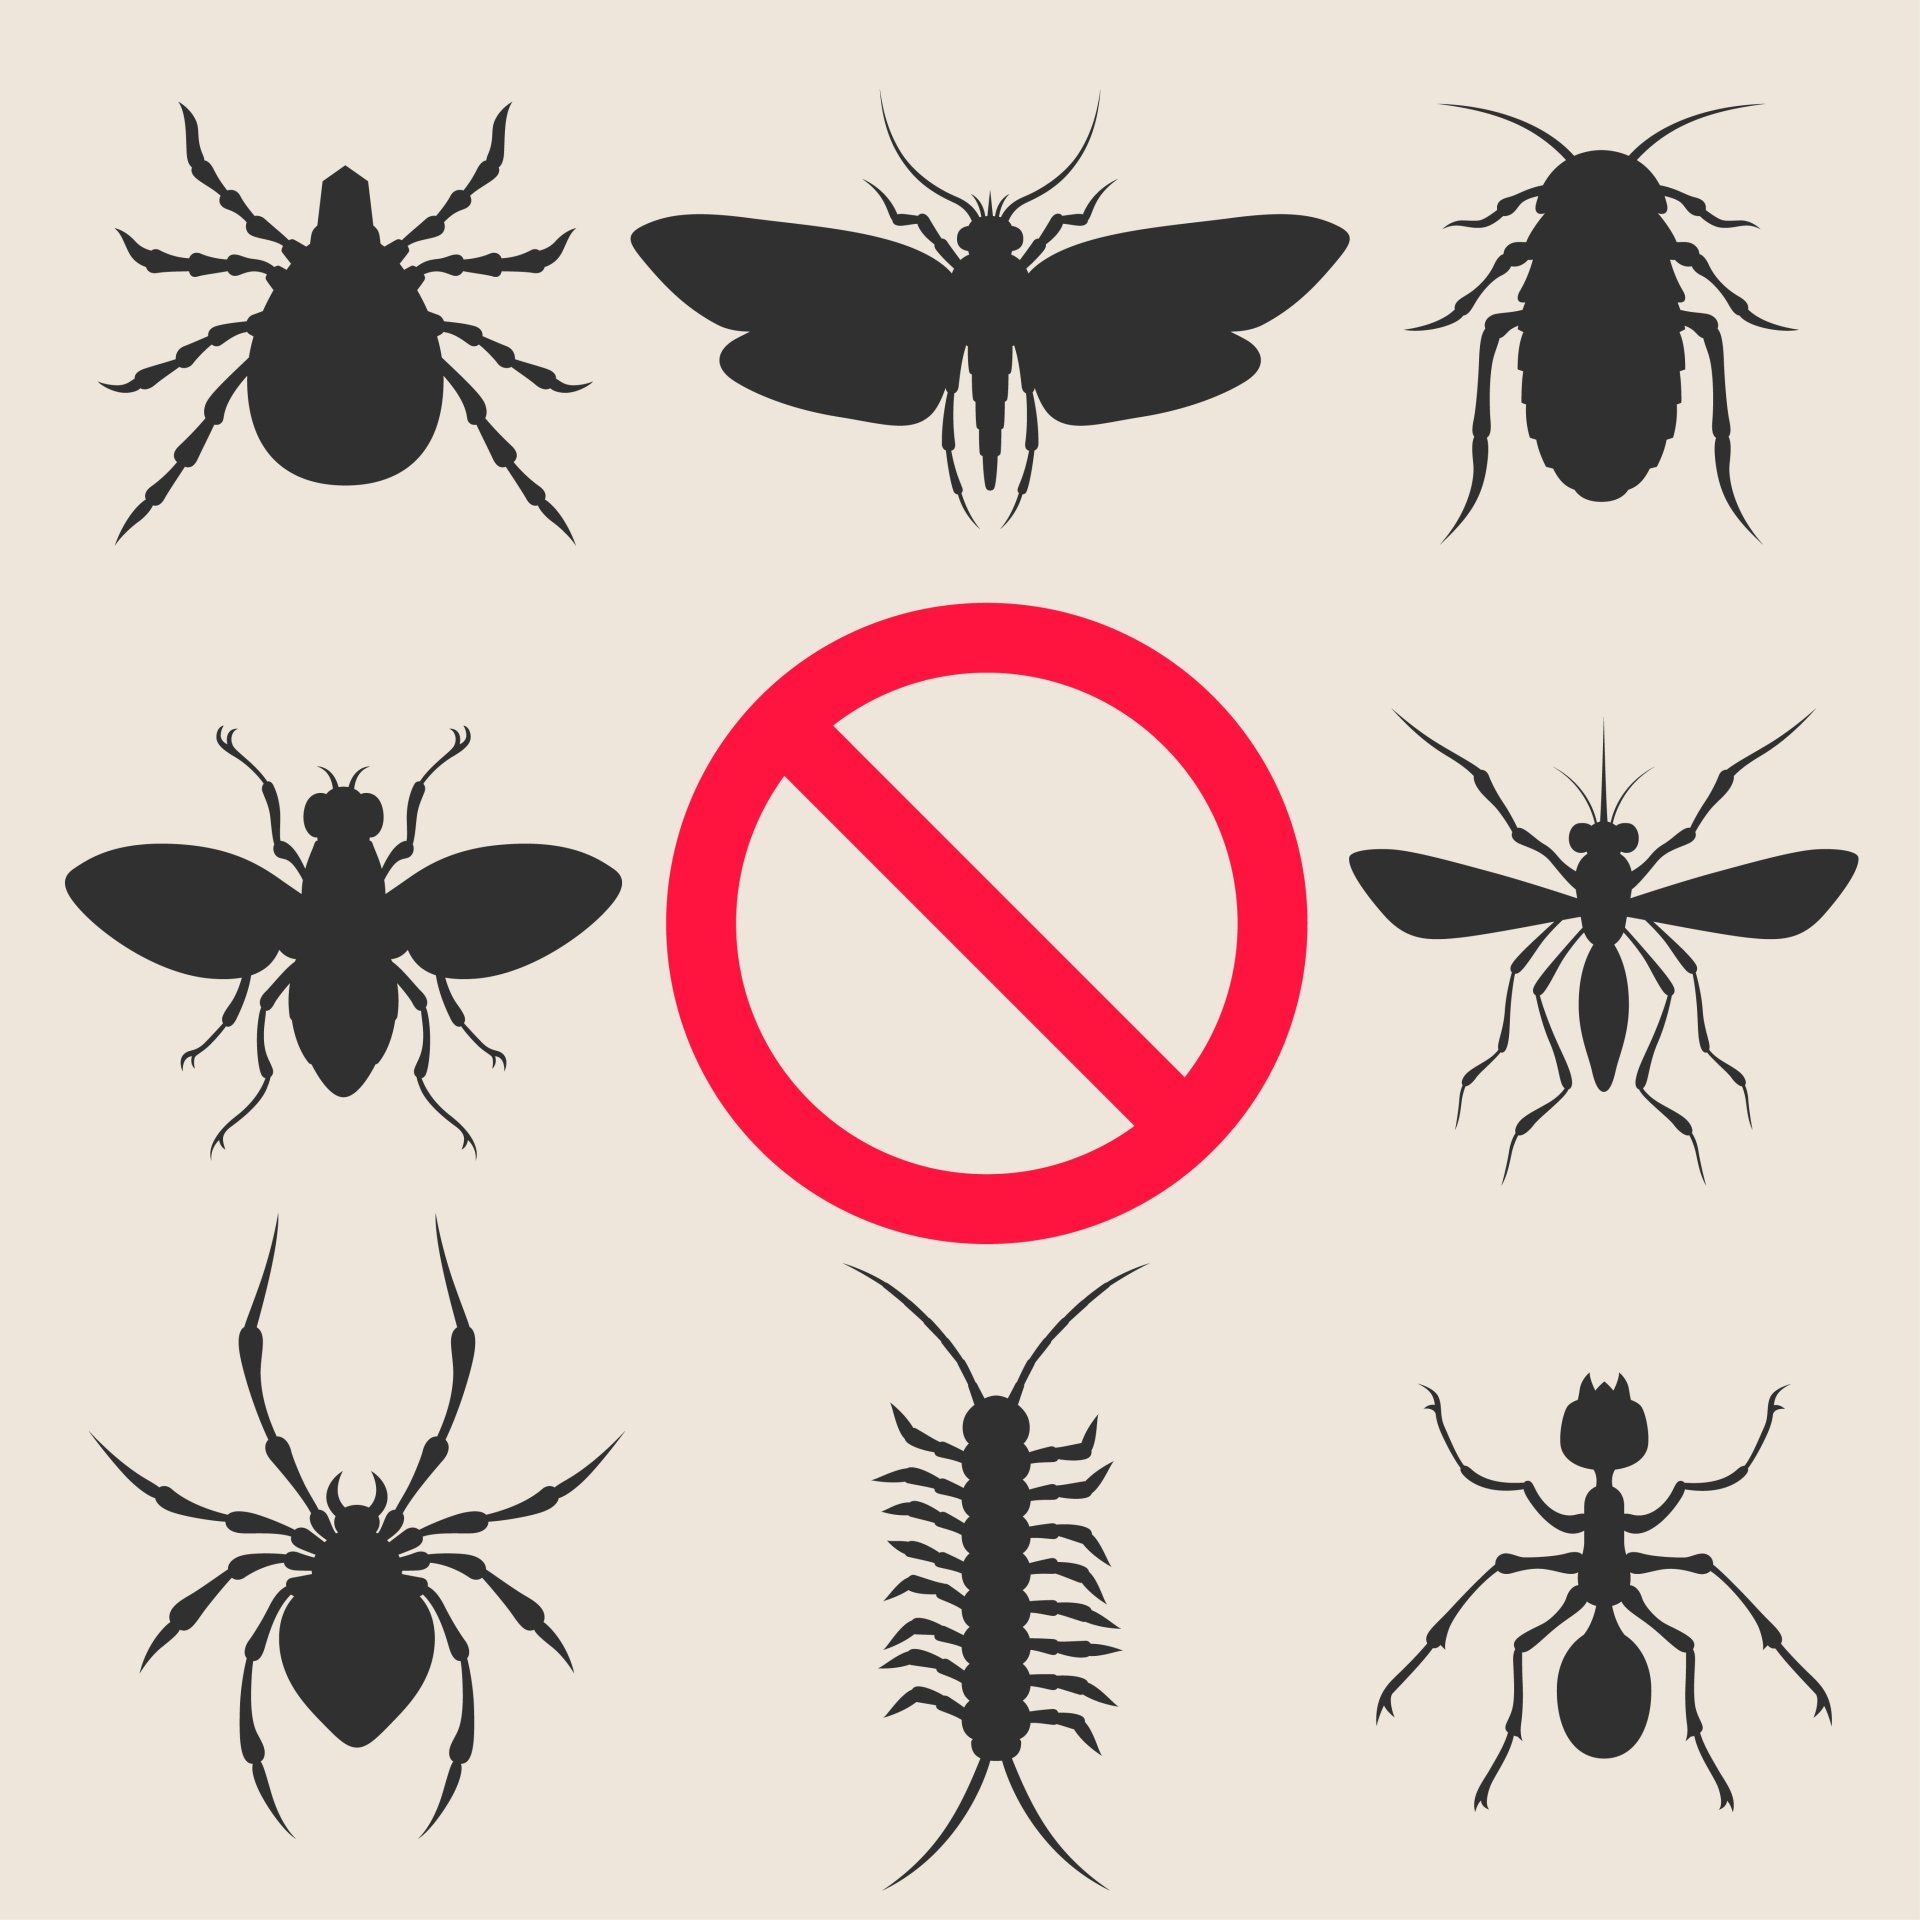 A set of silhouettes of insects with a no sign in the middle